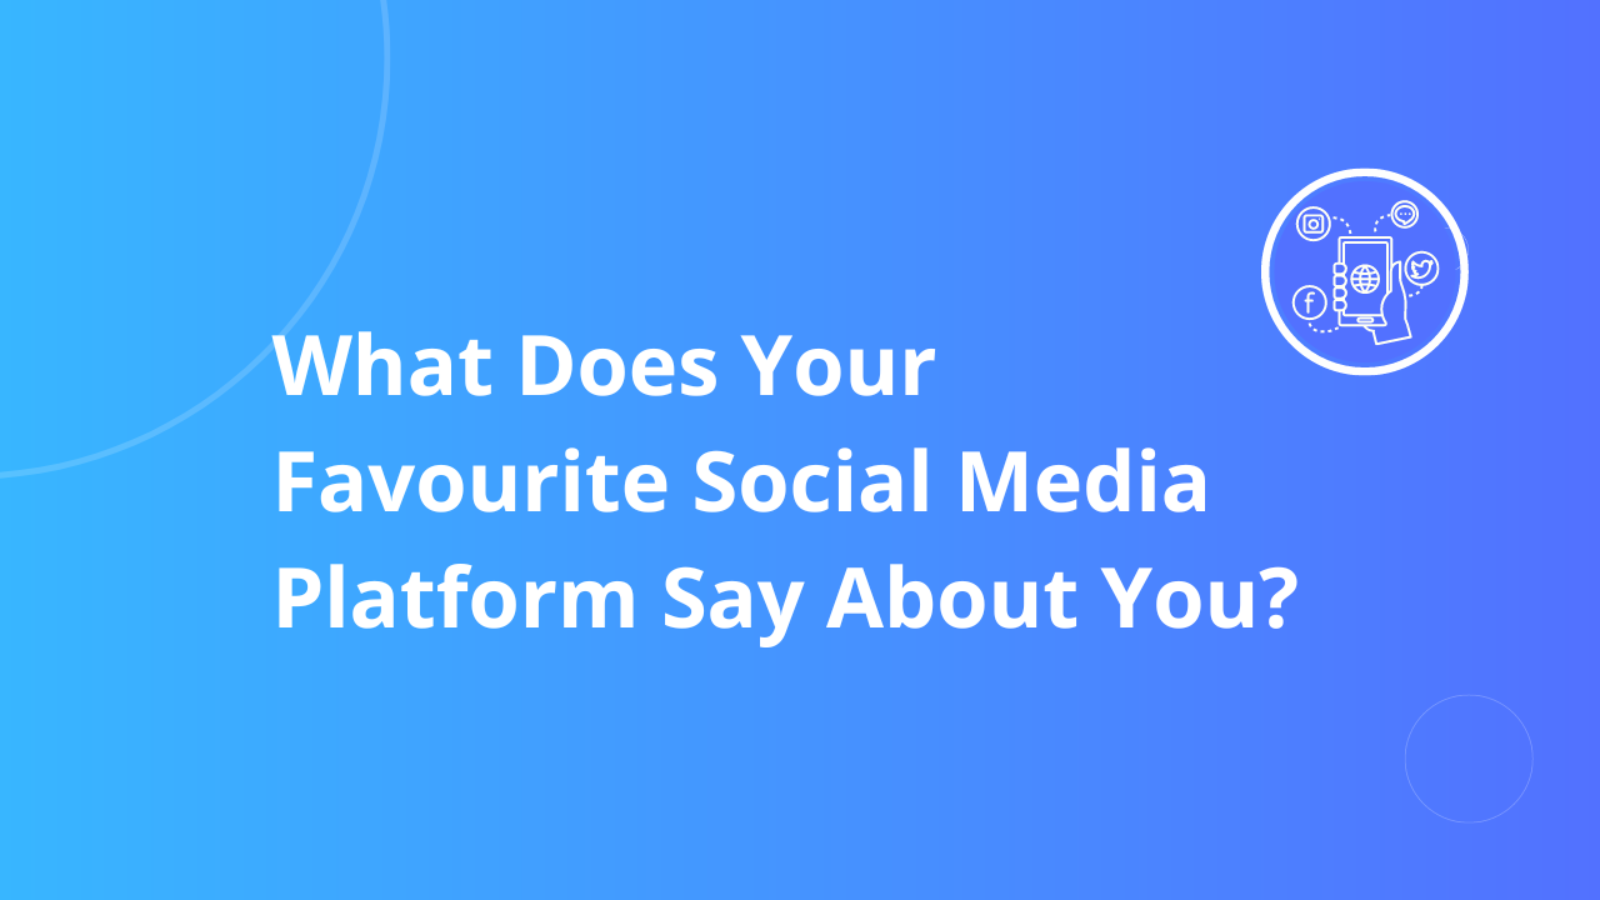 What  Does Your Favourite Social Media Platform Say About You?